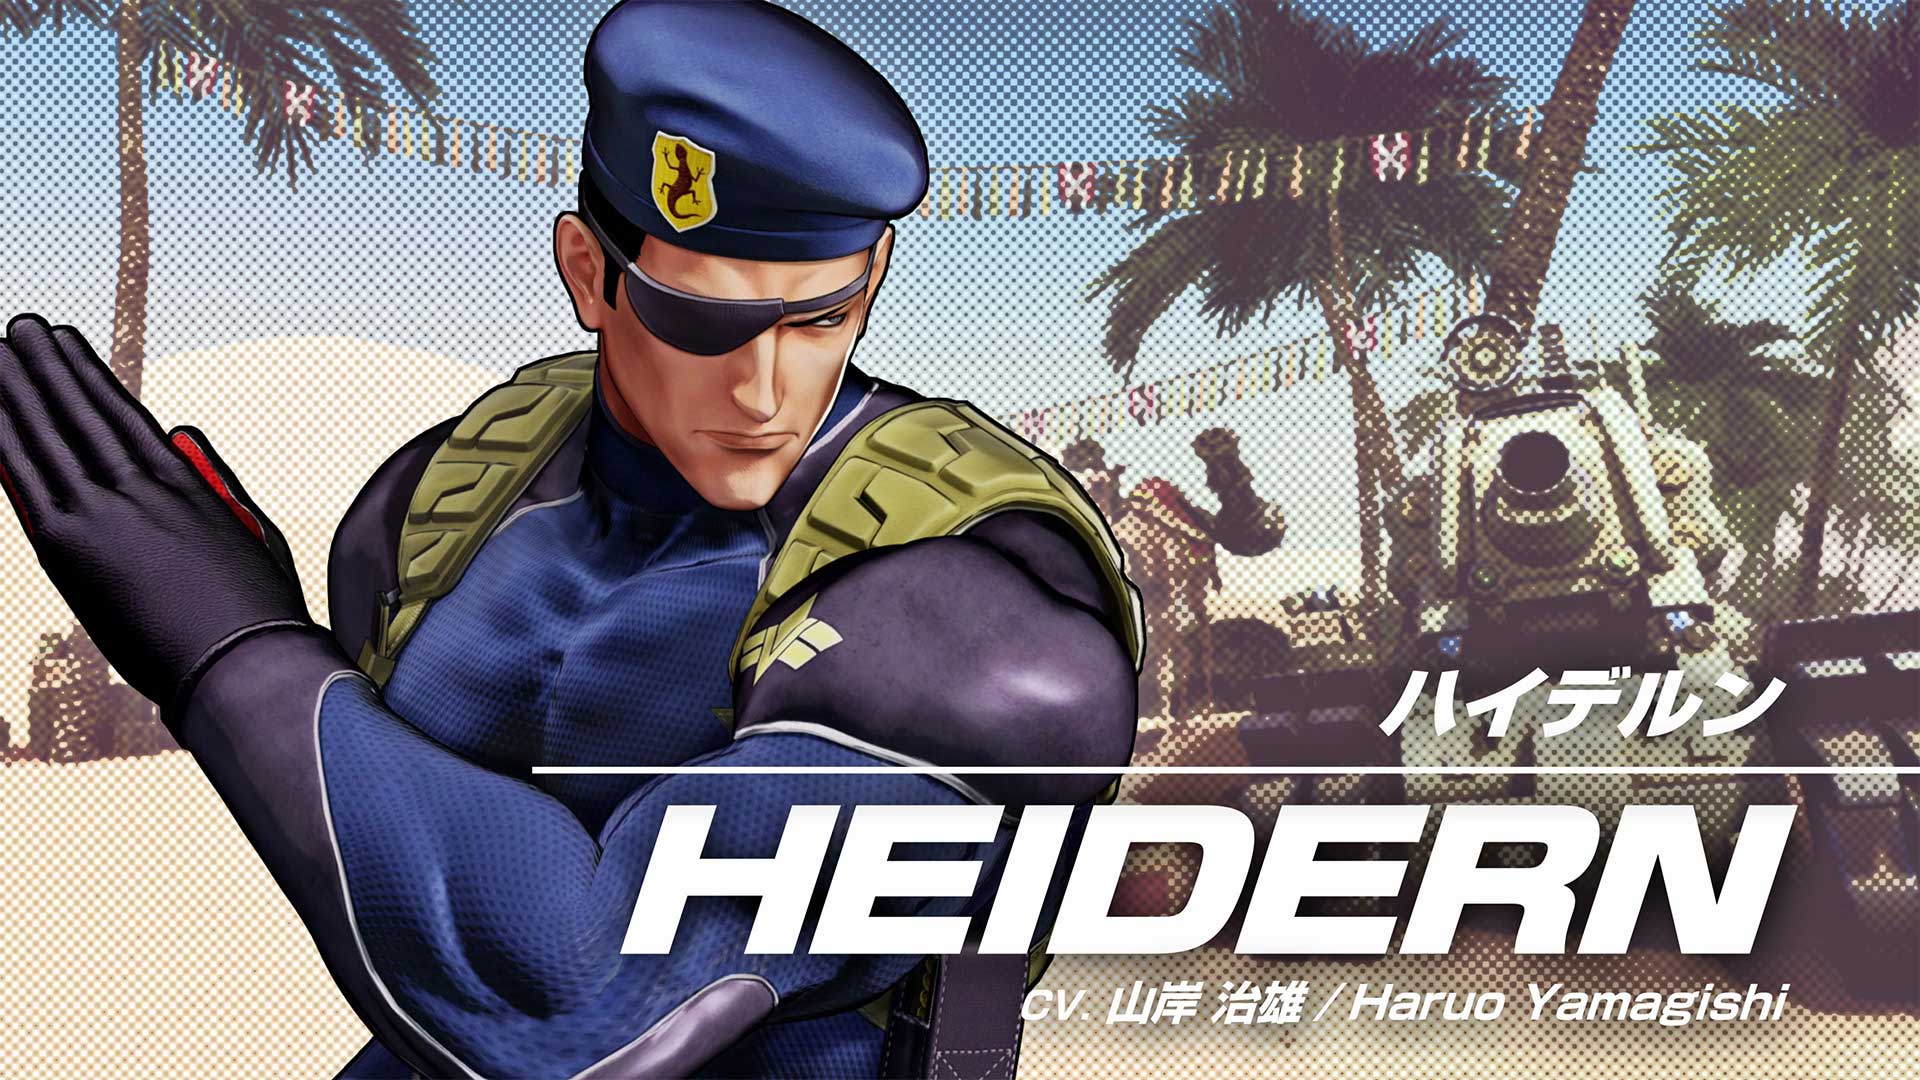 The King of Fighters XV features the character of Heidern